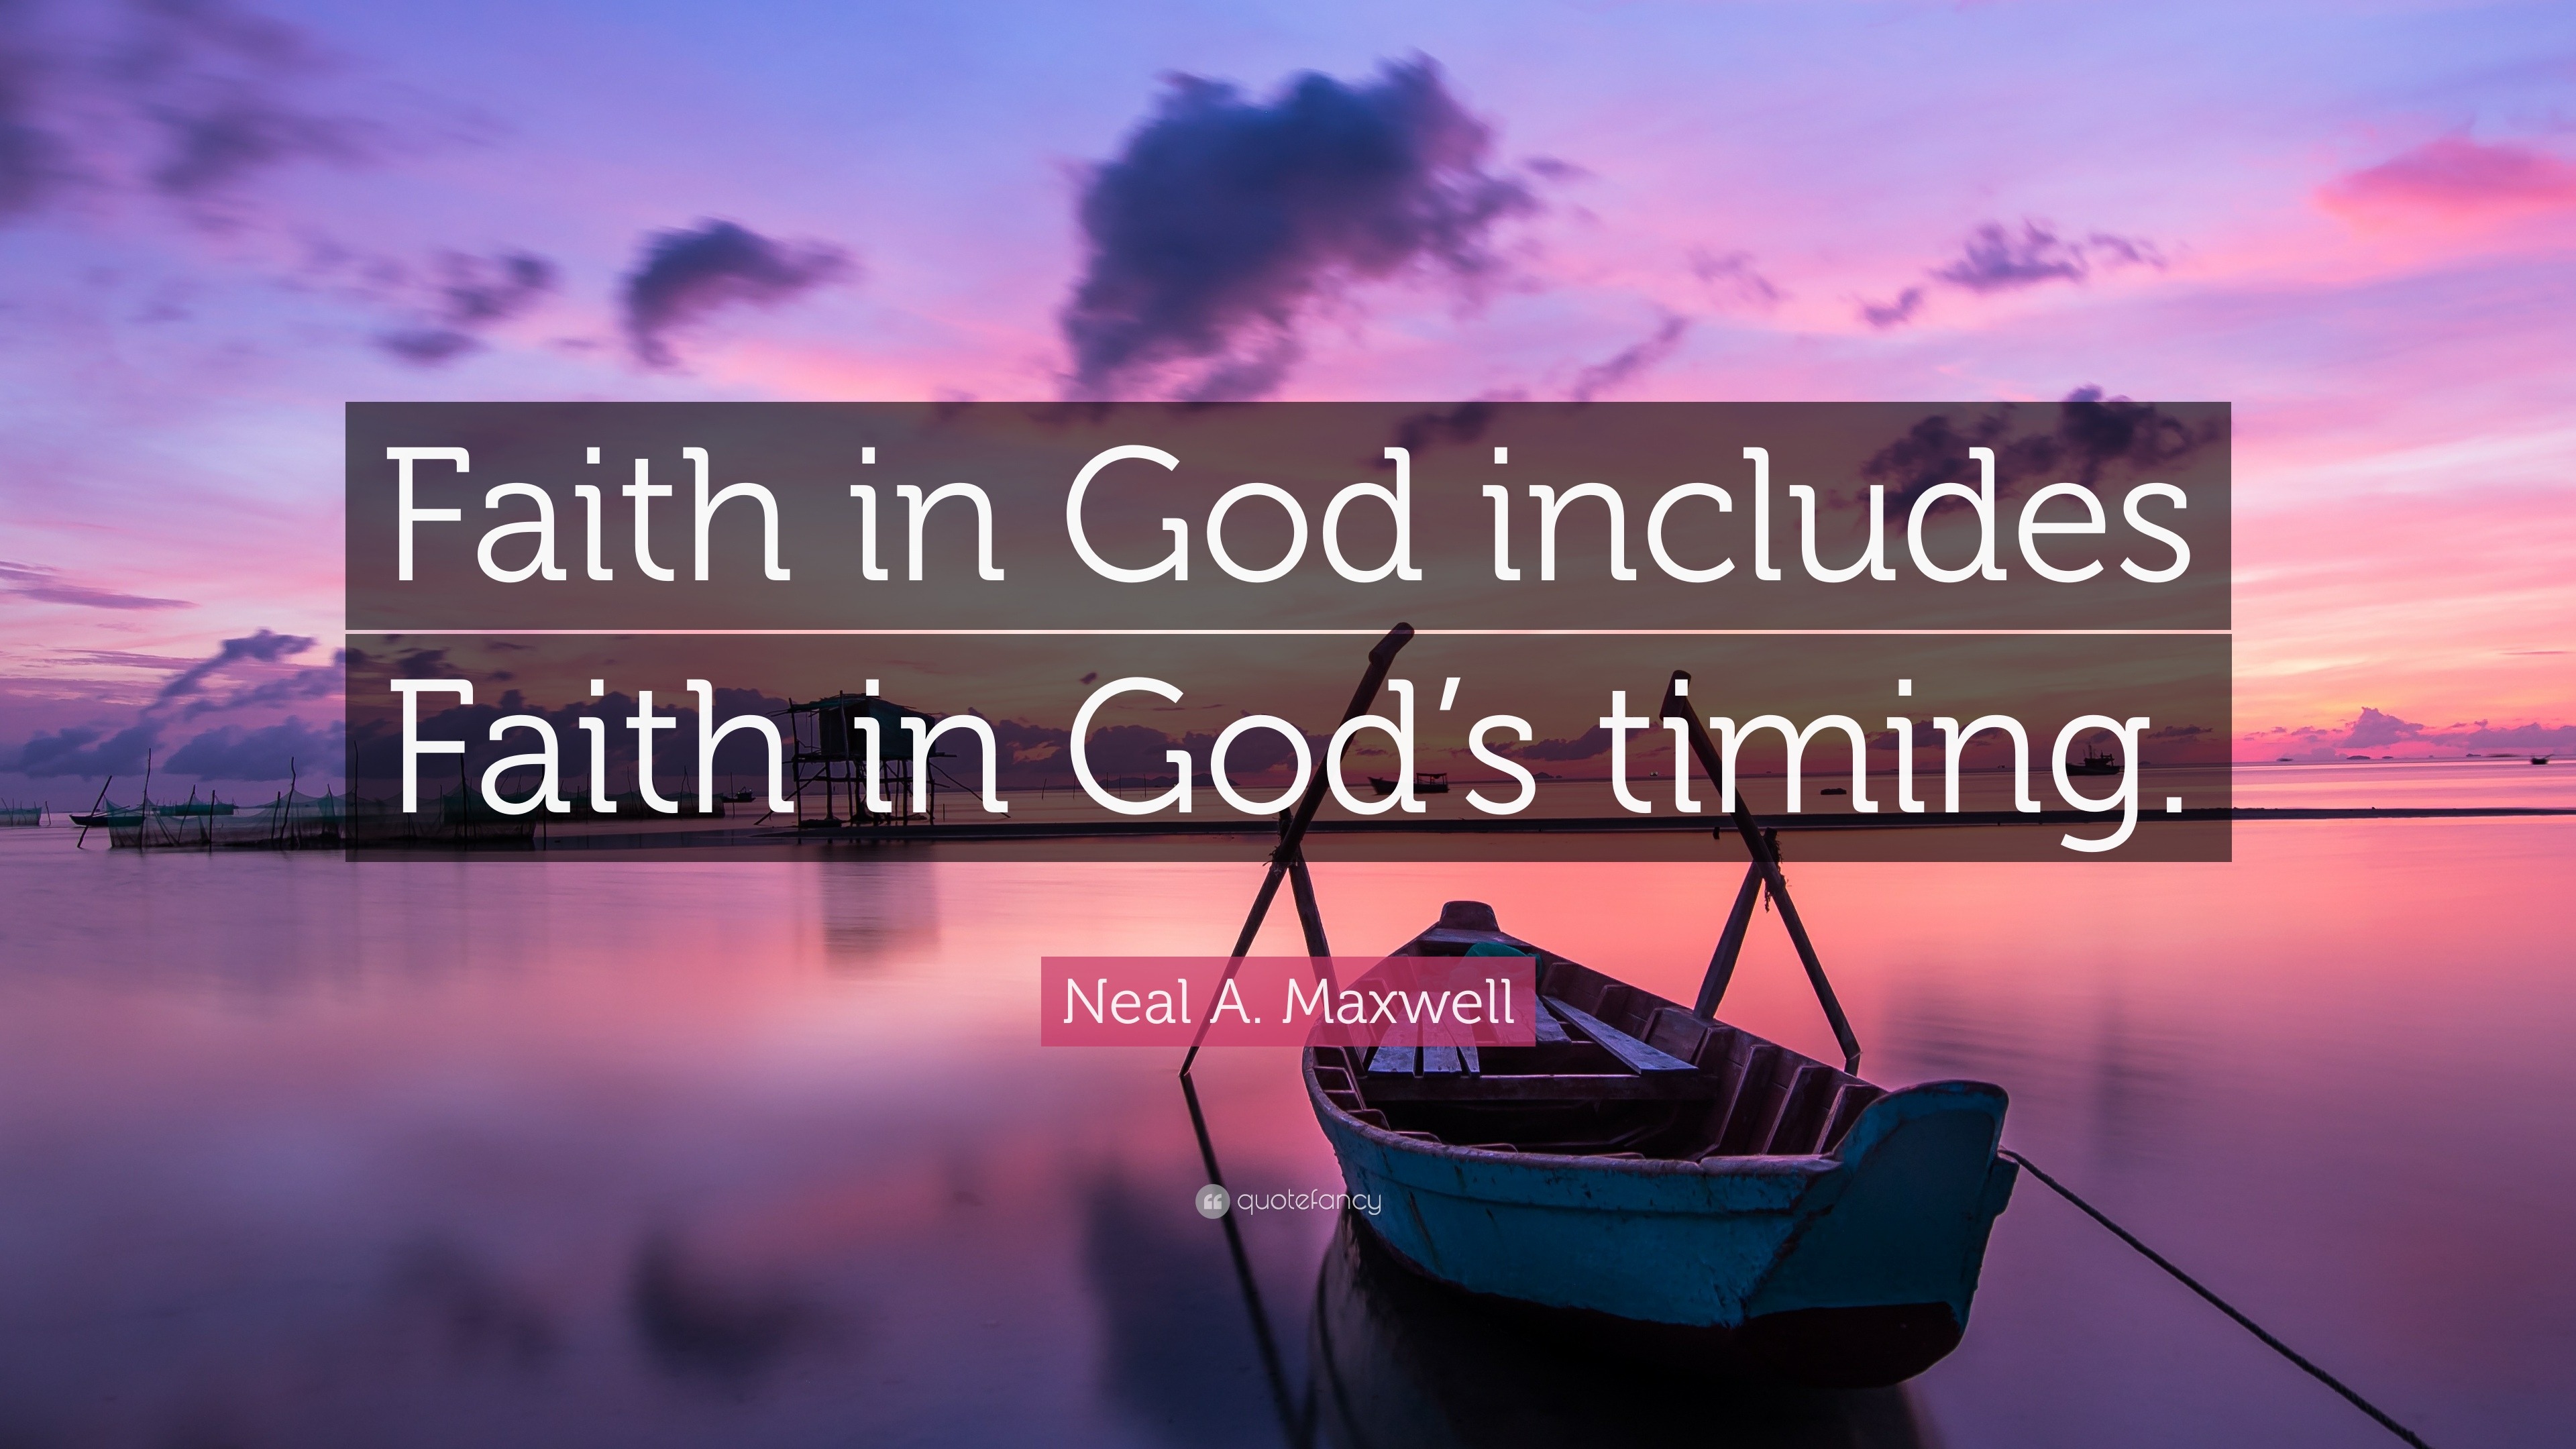 Neal A. Maxwell Quote: “Faith in God includes Faith in God’s timing.”